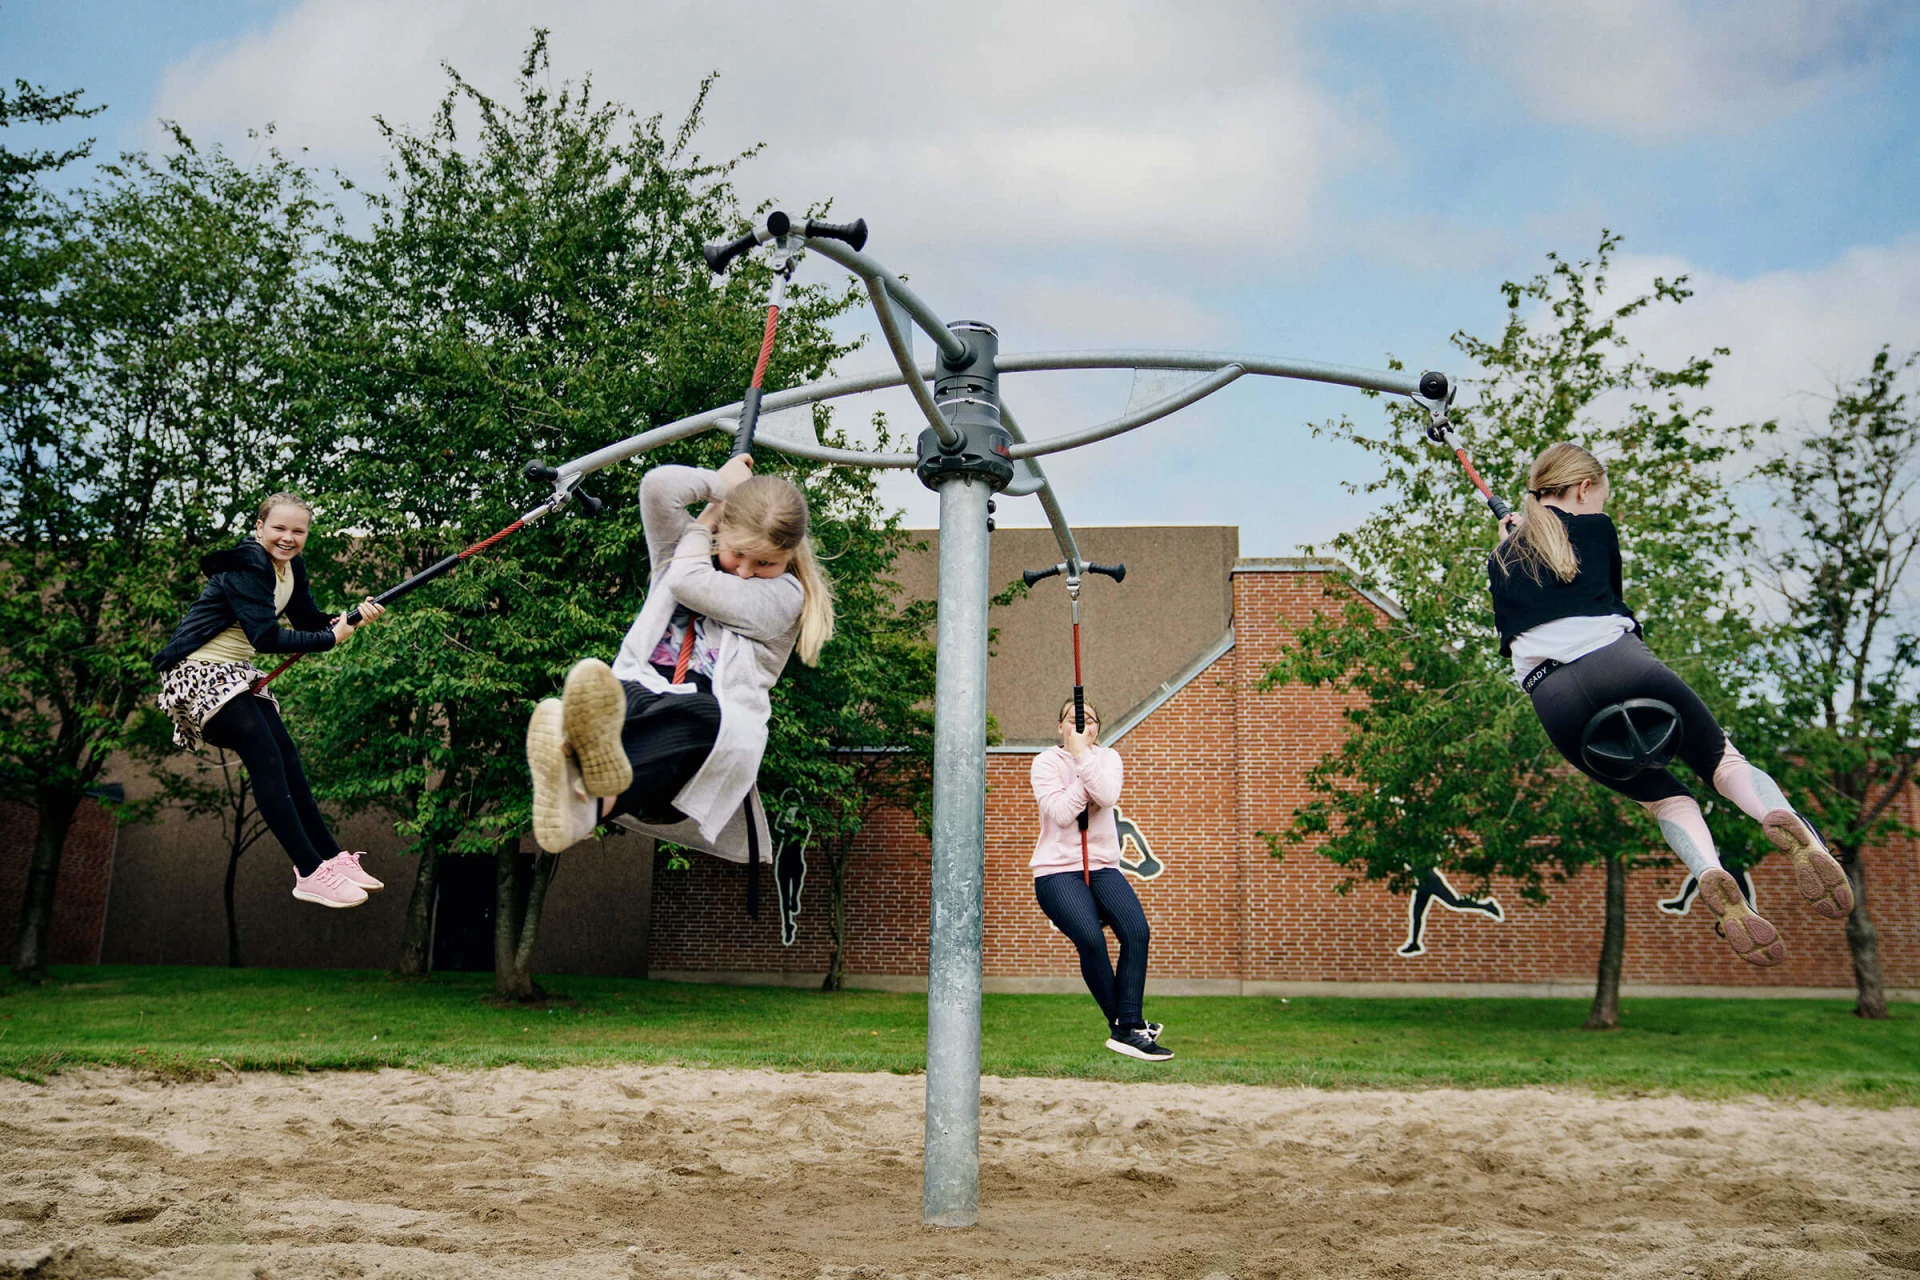 Tweens playing on a spinning swing set